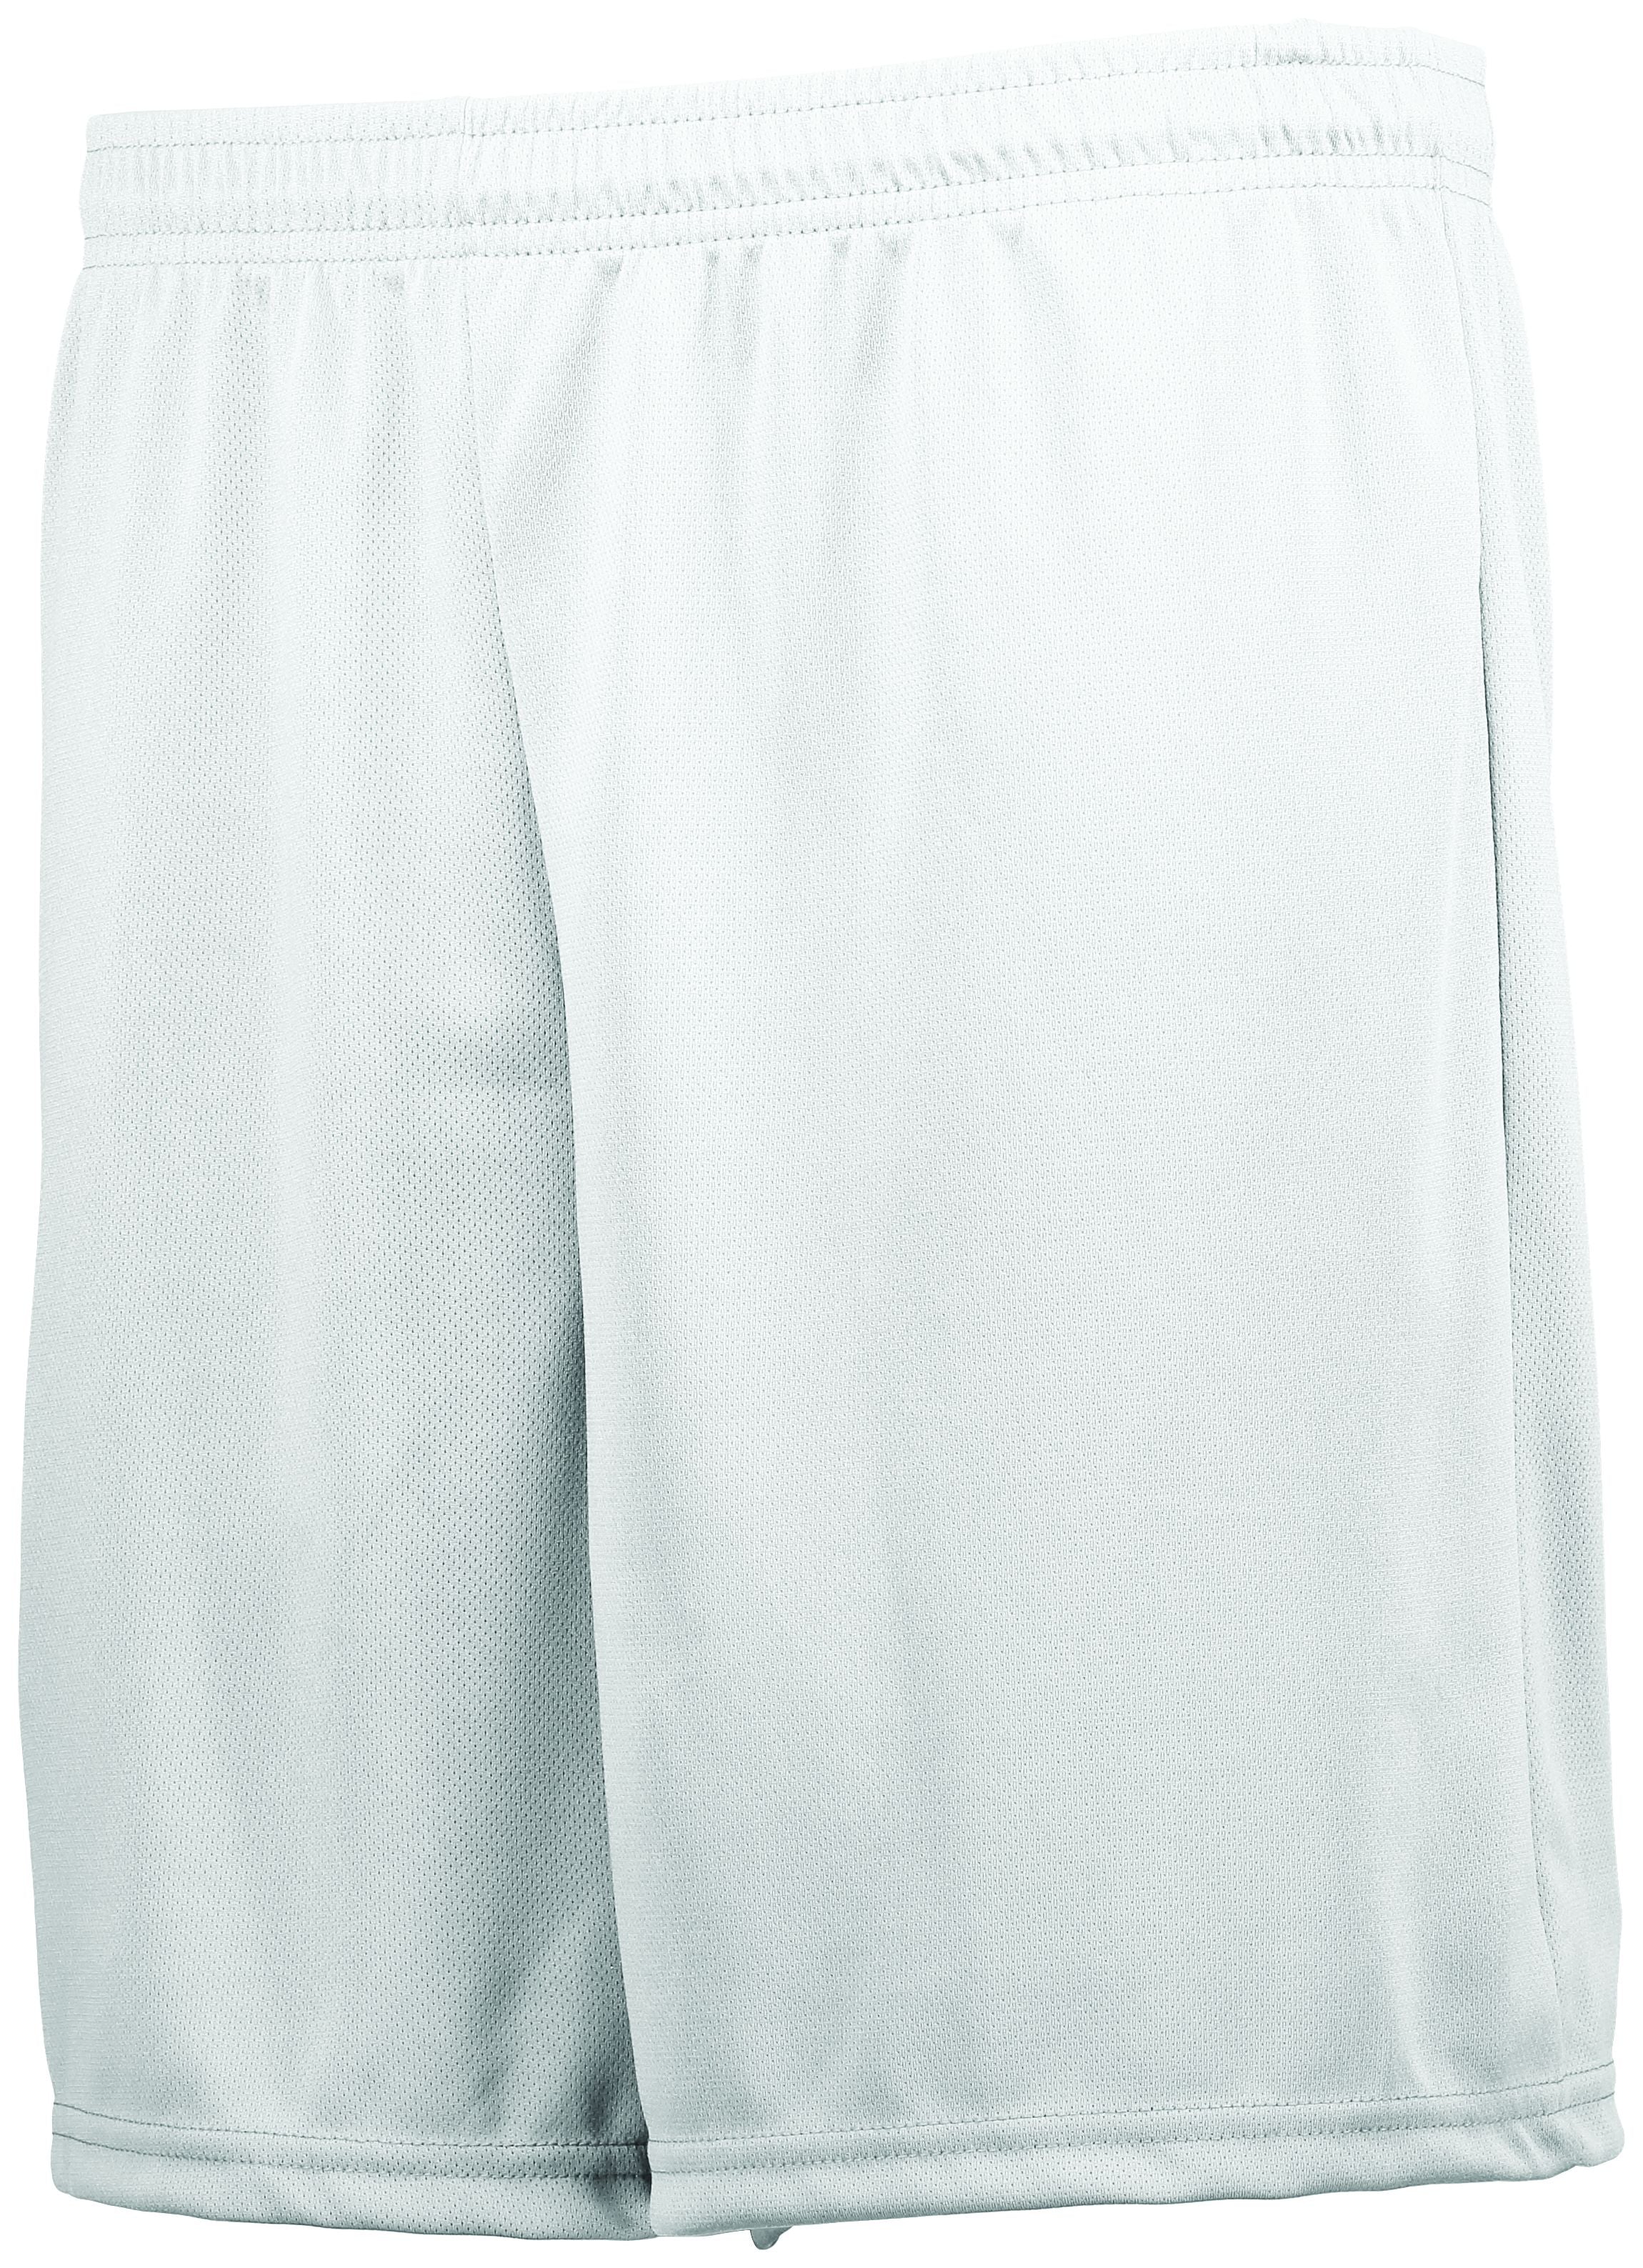 High 5 Prevail Shorts in White  -Part of the Adult, Adult-Shorts, High5-Products, Soccer, All-Sports-1 product lines at KanaleyCreations.com